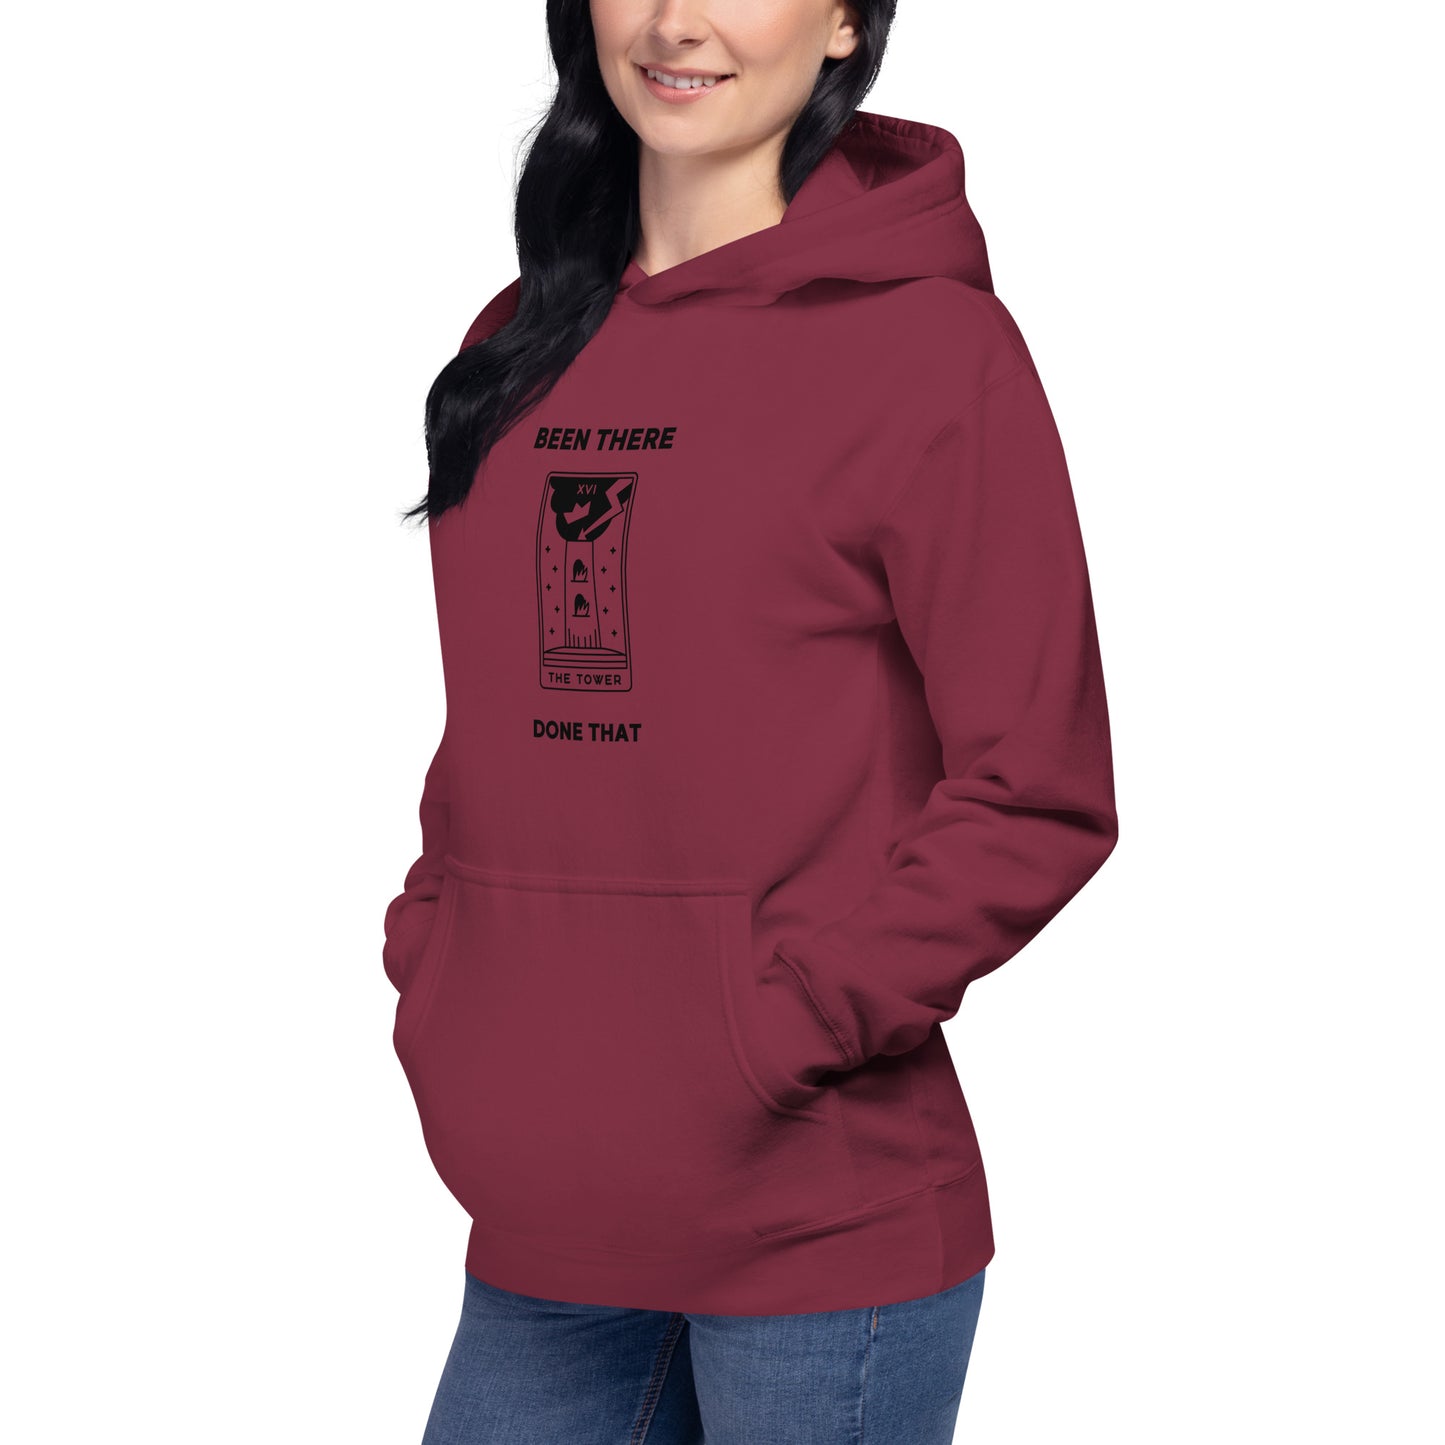 Been there, done that. Tower moment, Unisex Hoodie